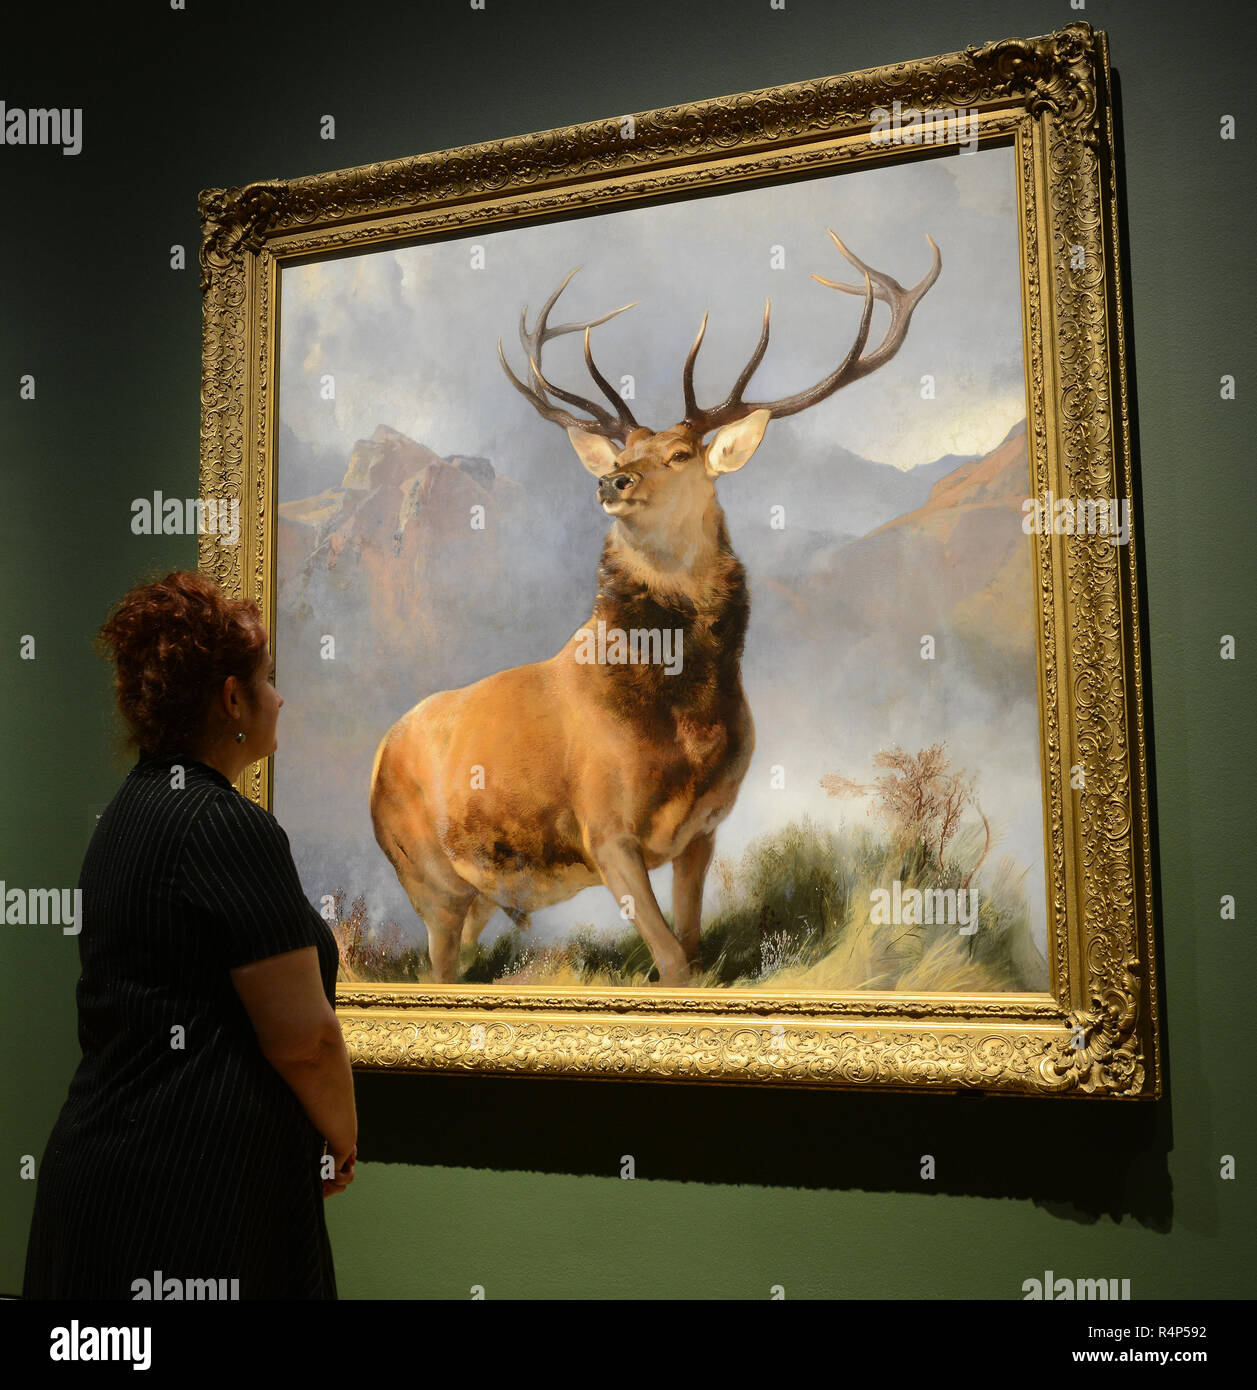 London, UK. 28th November, 2018. The Monarch of the Glen goes on display at The National Gallery. Painted around 1851 by English artist Sir Edwin Landseer, it depicts a royal stag and is arguably the world’s best known animal painting. Credit: Howard Jones/Alamy Live News Stock Photo